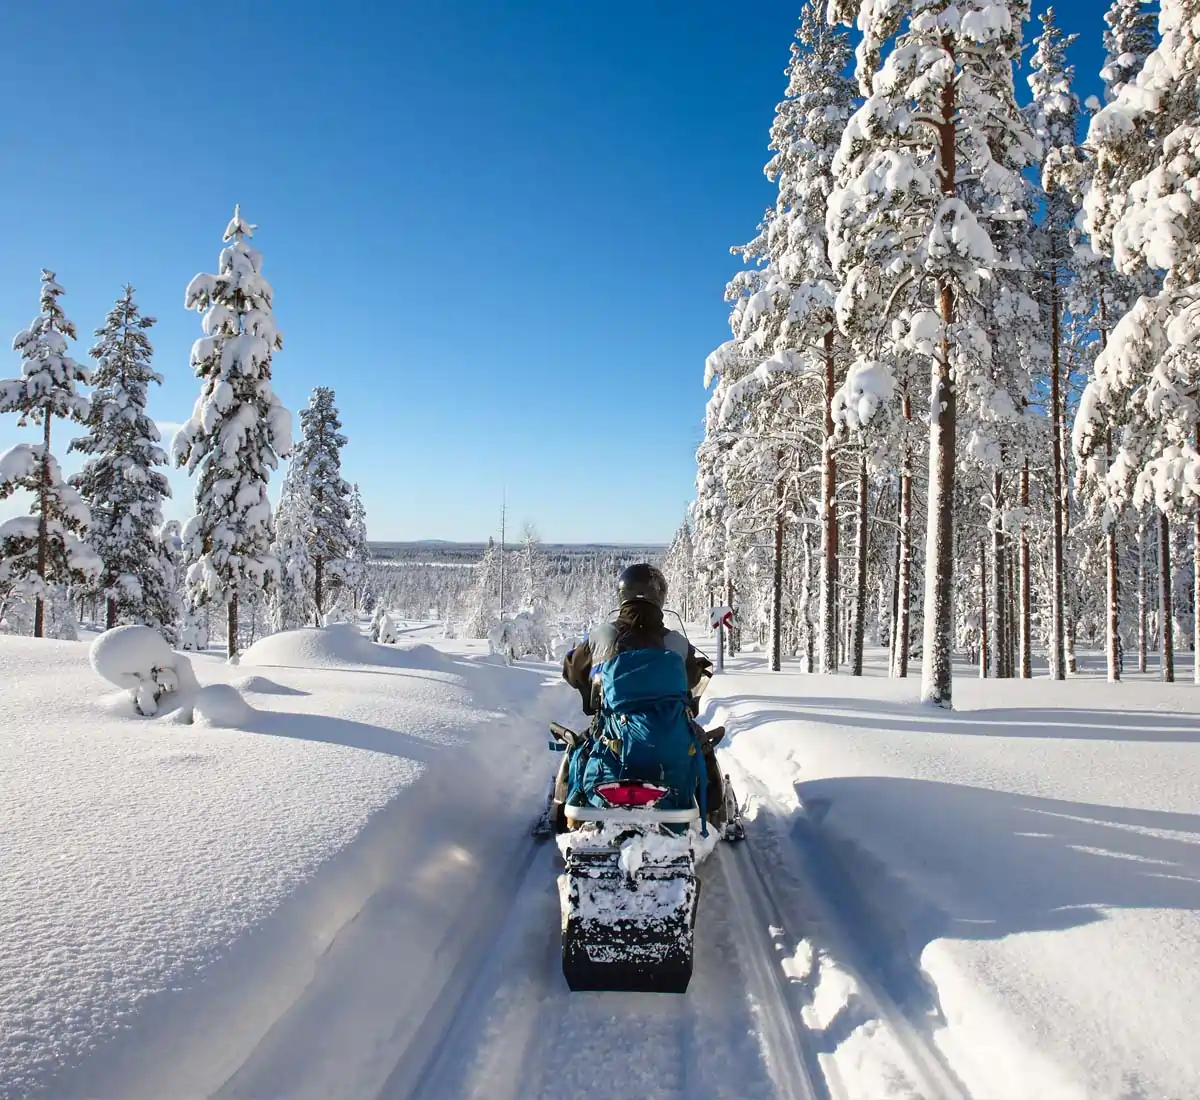 Snowmobiler riding along a path in a snowy forest.